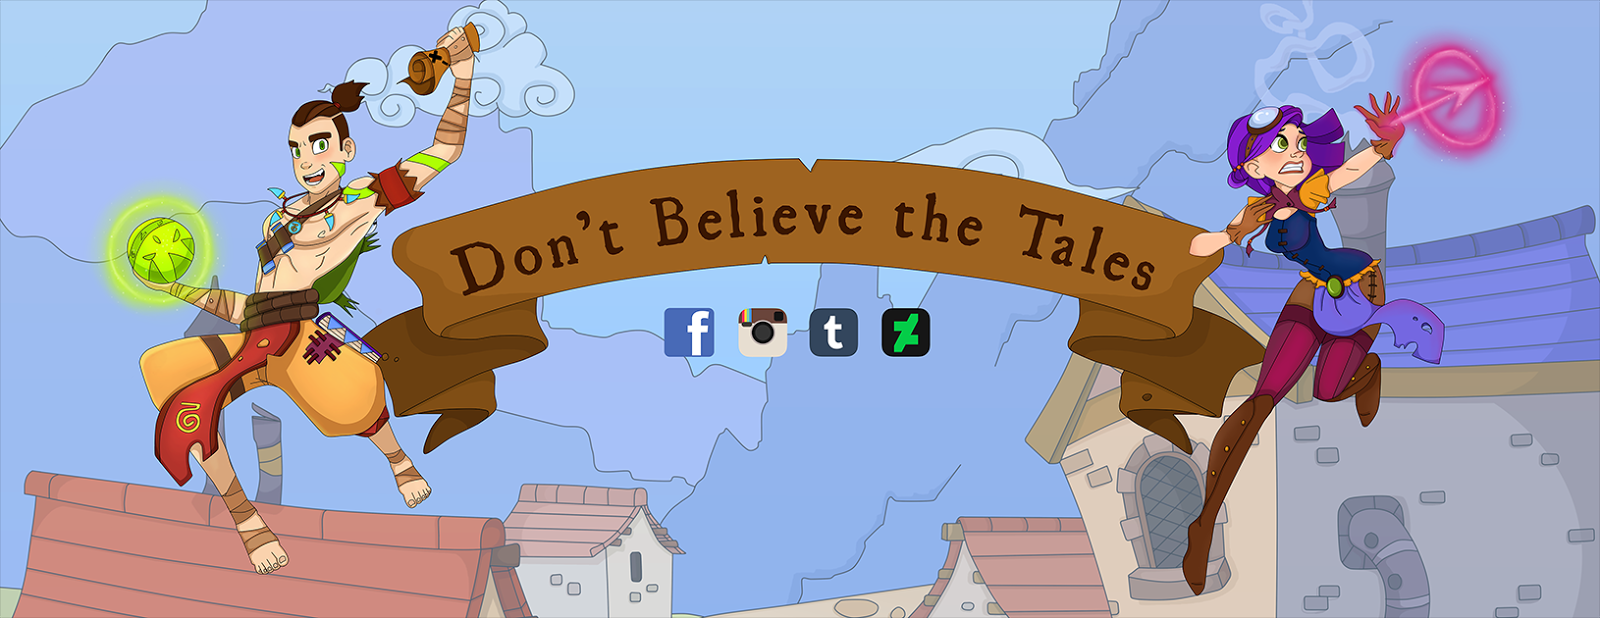 Don't Believe the Tales